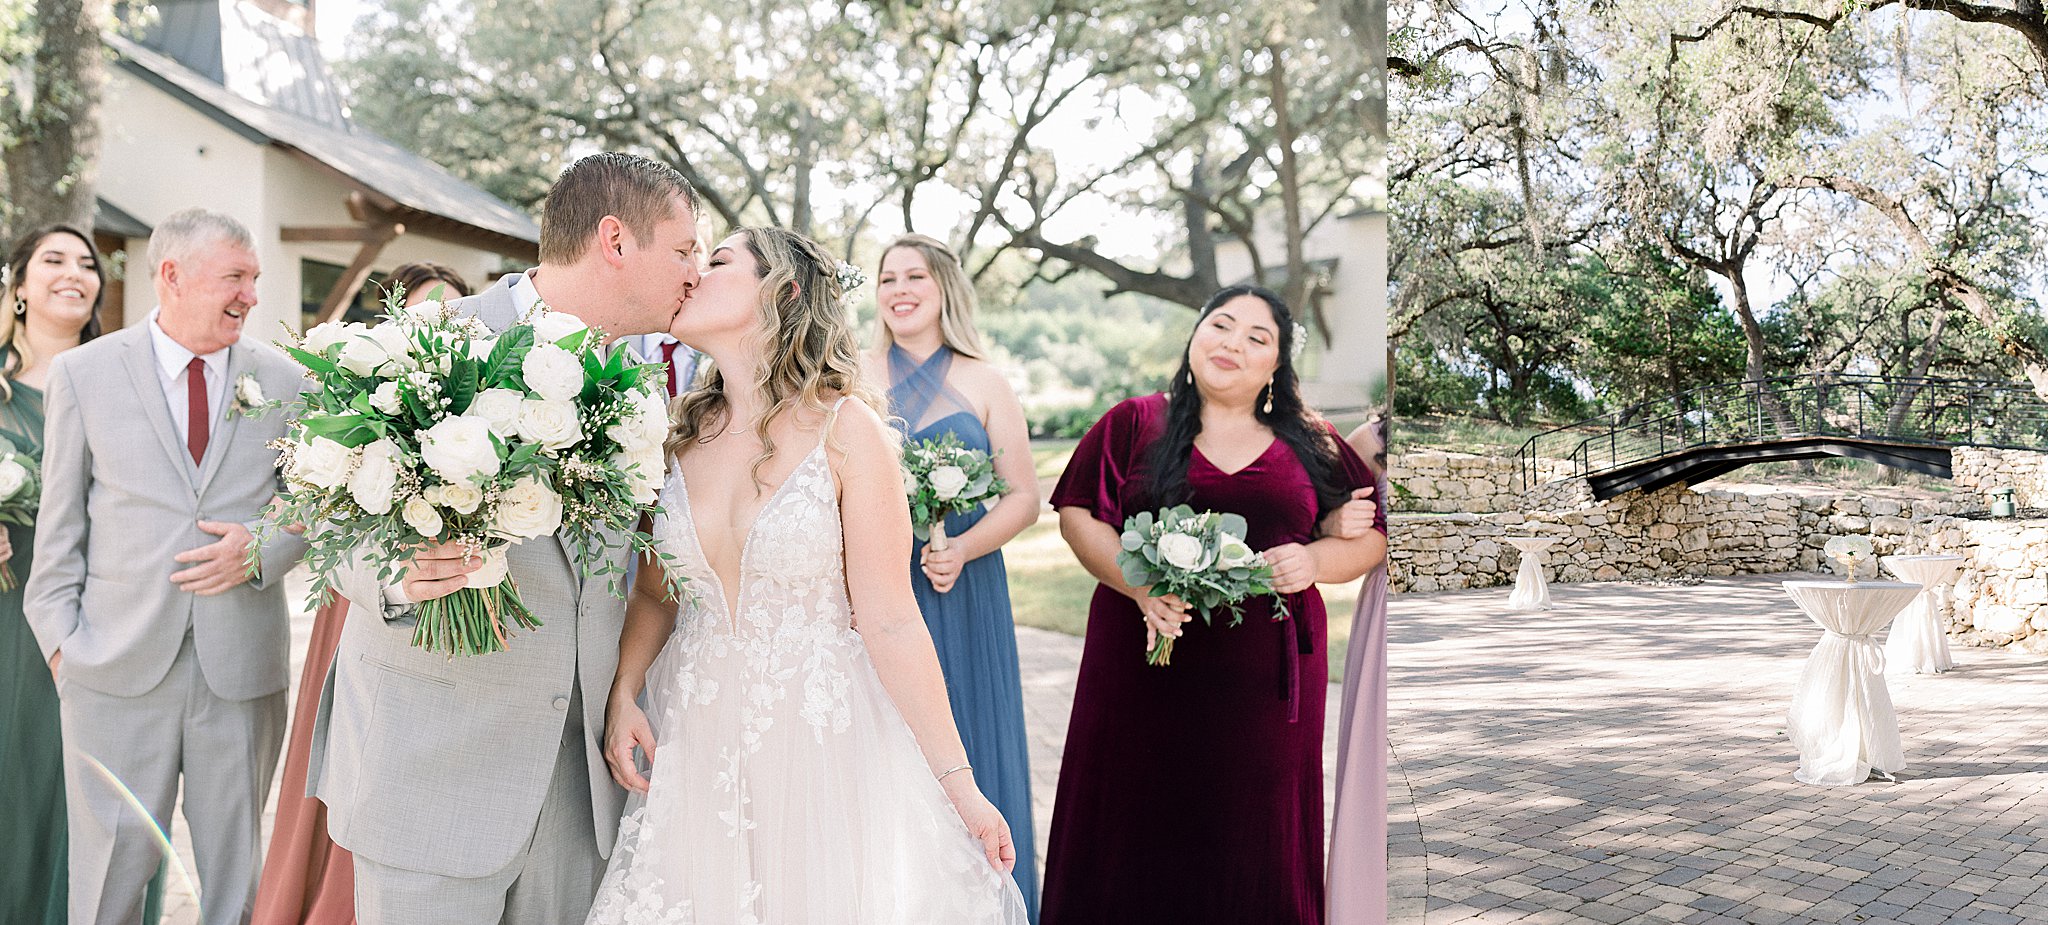 Multicolored Bridesmaids Gowns, A fall wedding at Hayes Hollow, Anna Kay Photography